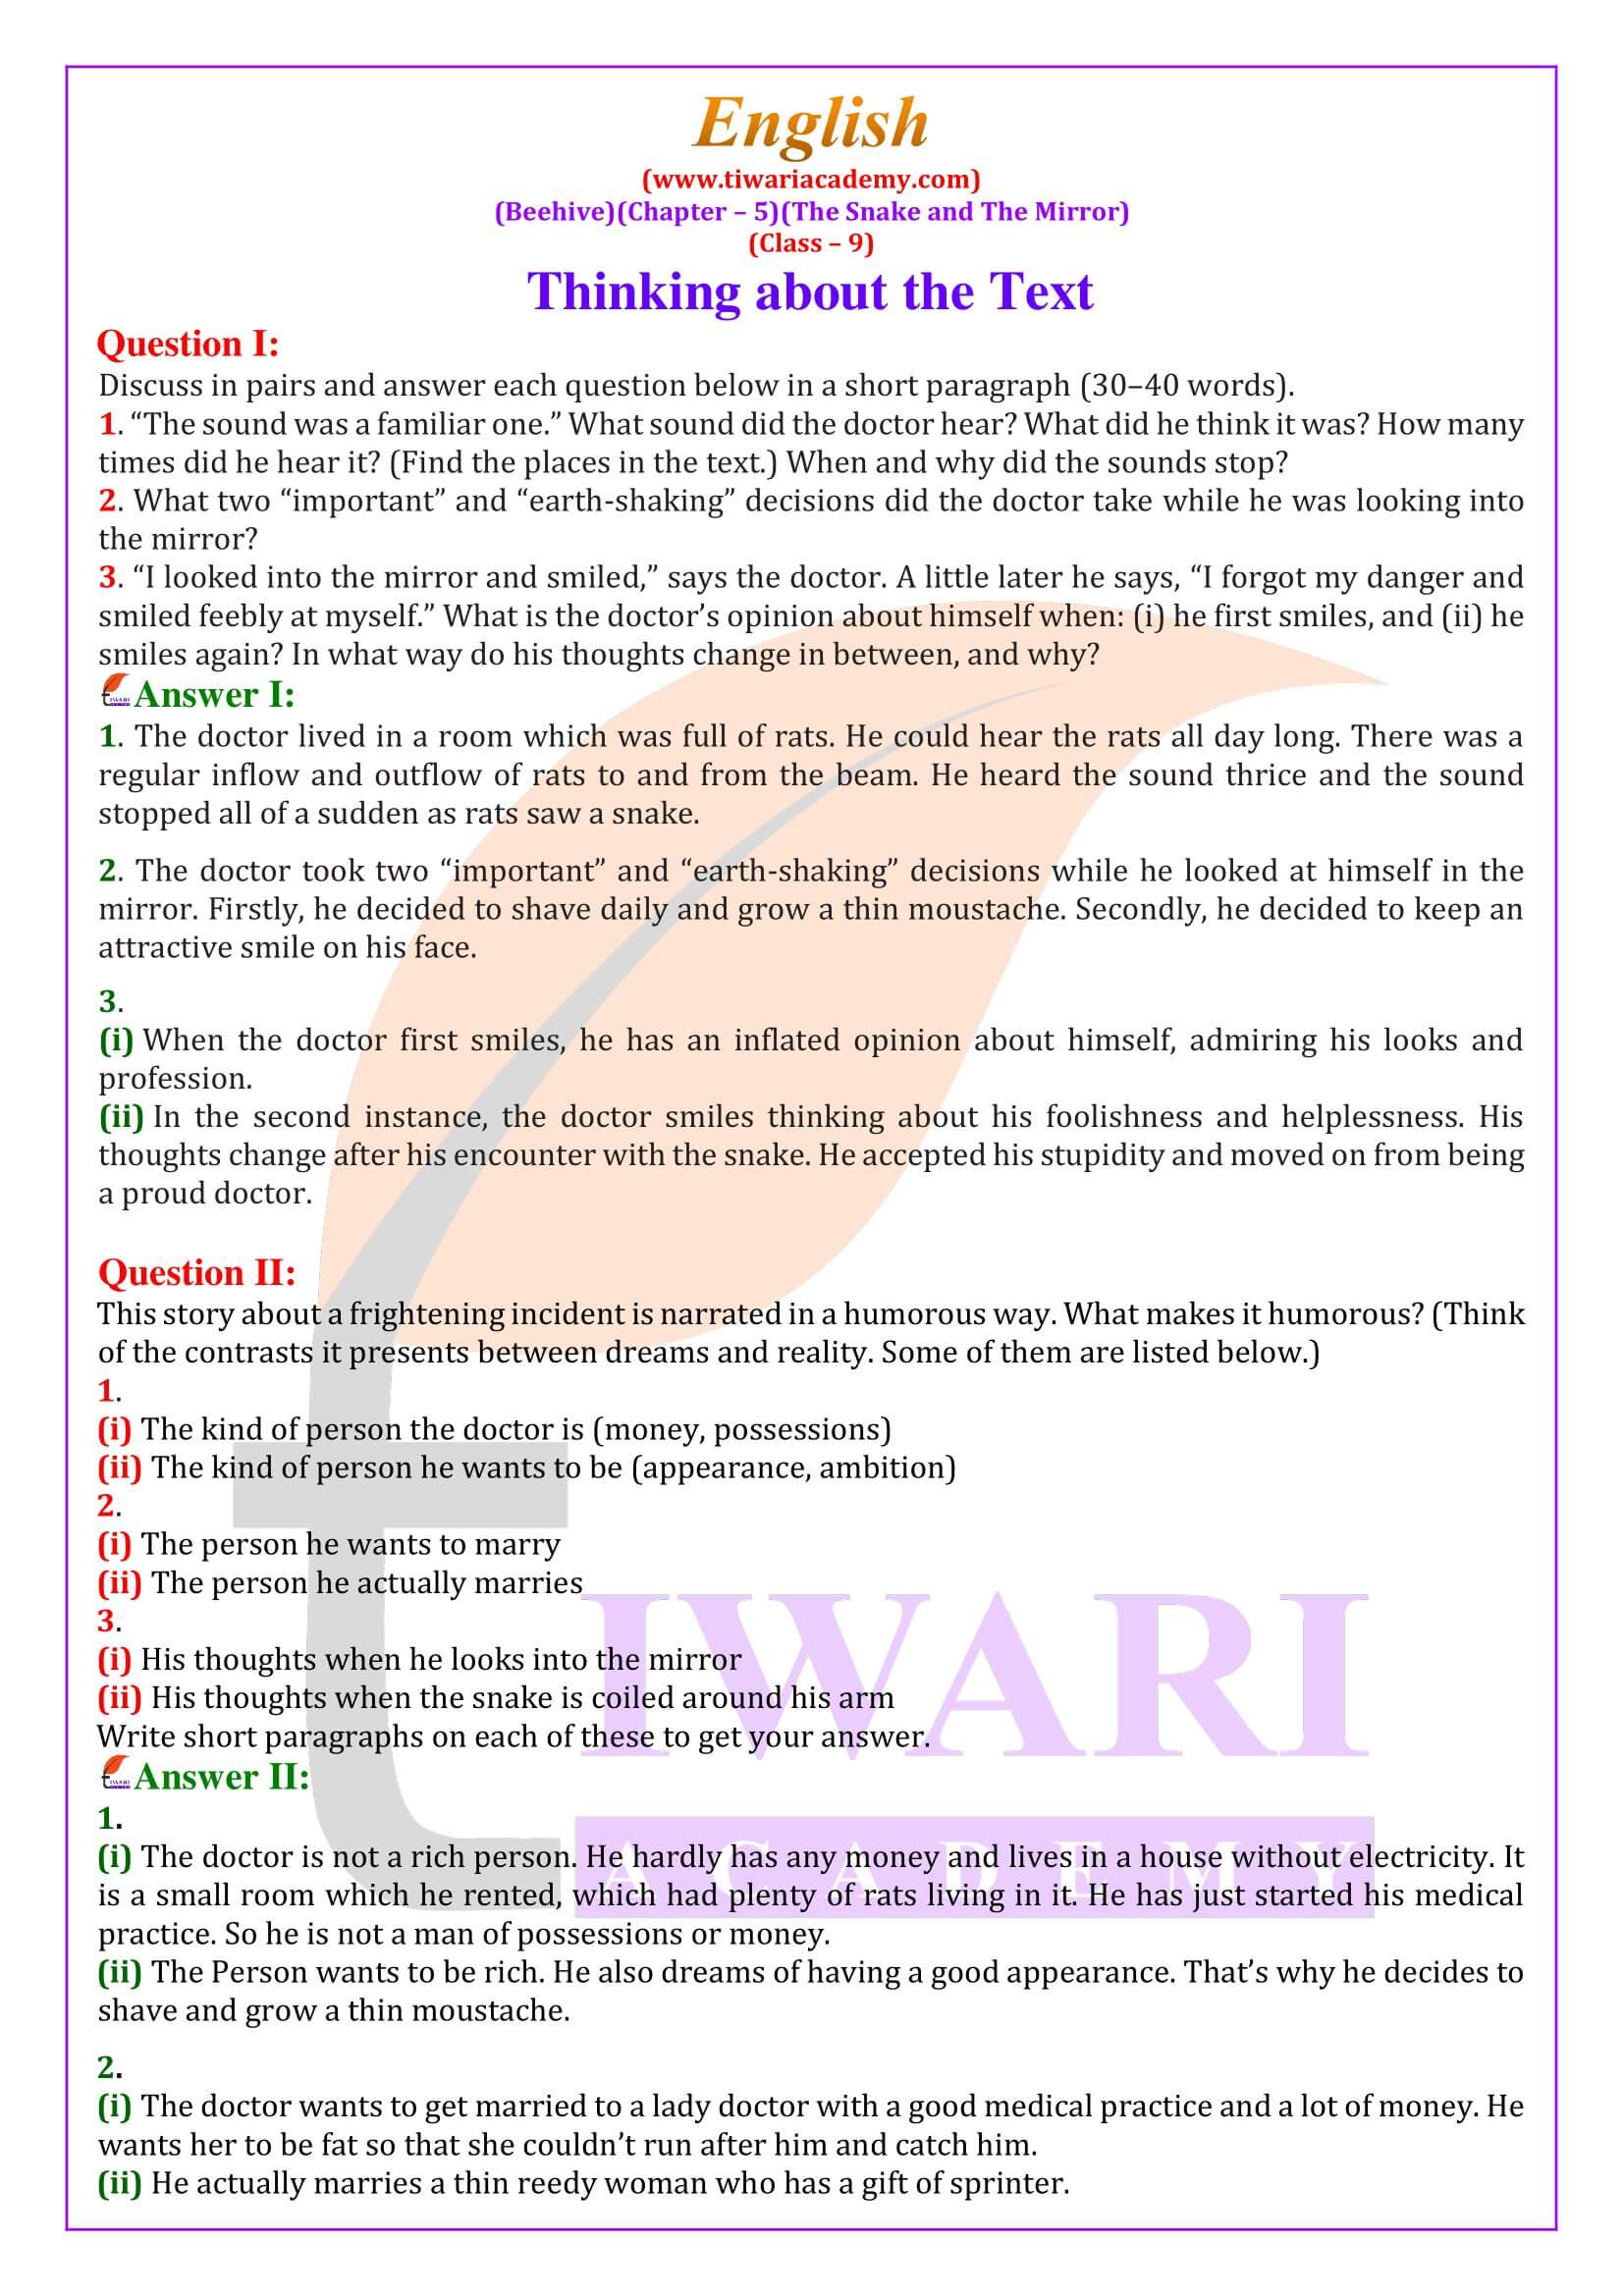 Class 9 English Beehive Chapter 5 The Snake and the Mirror